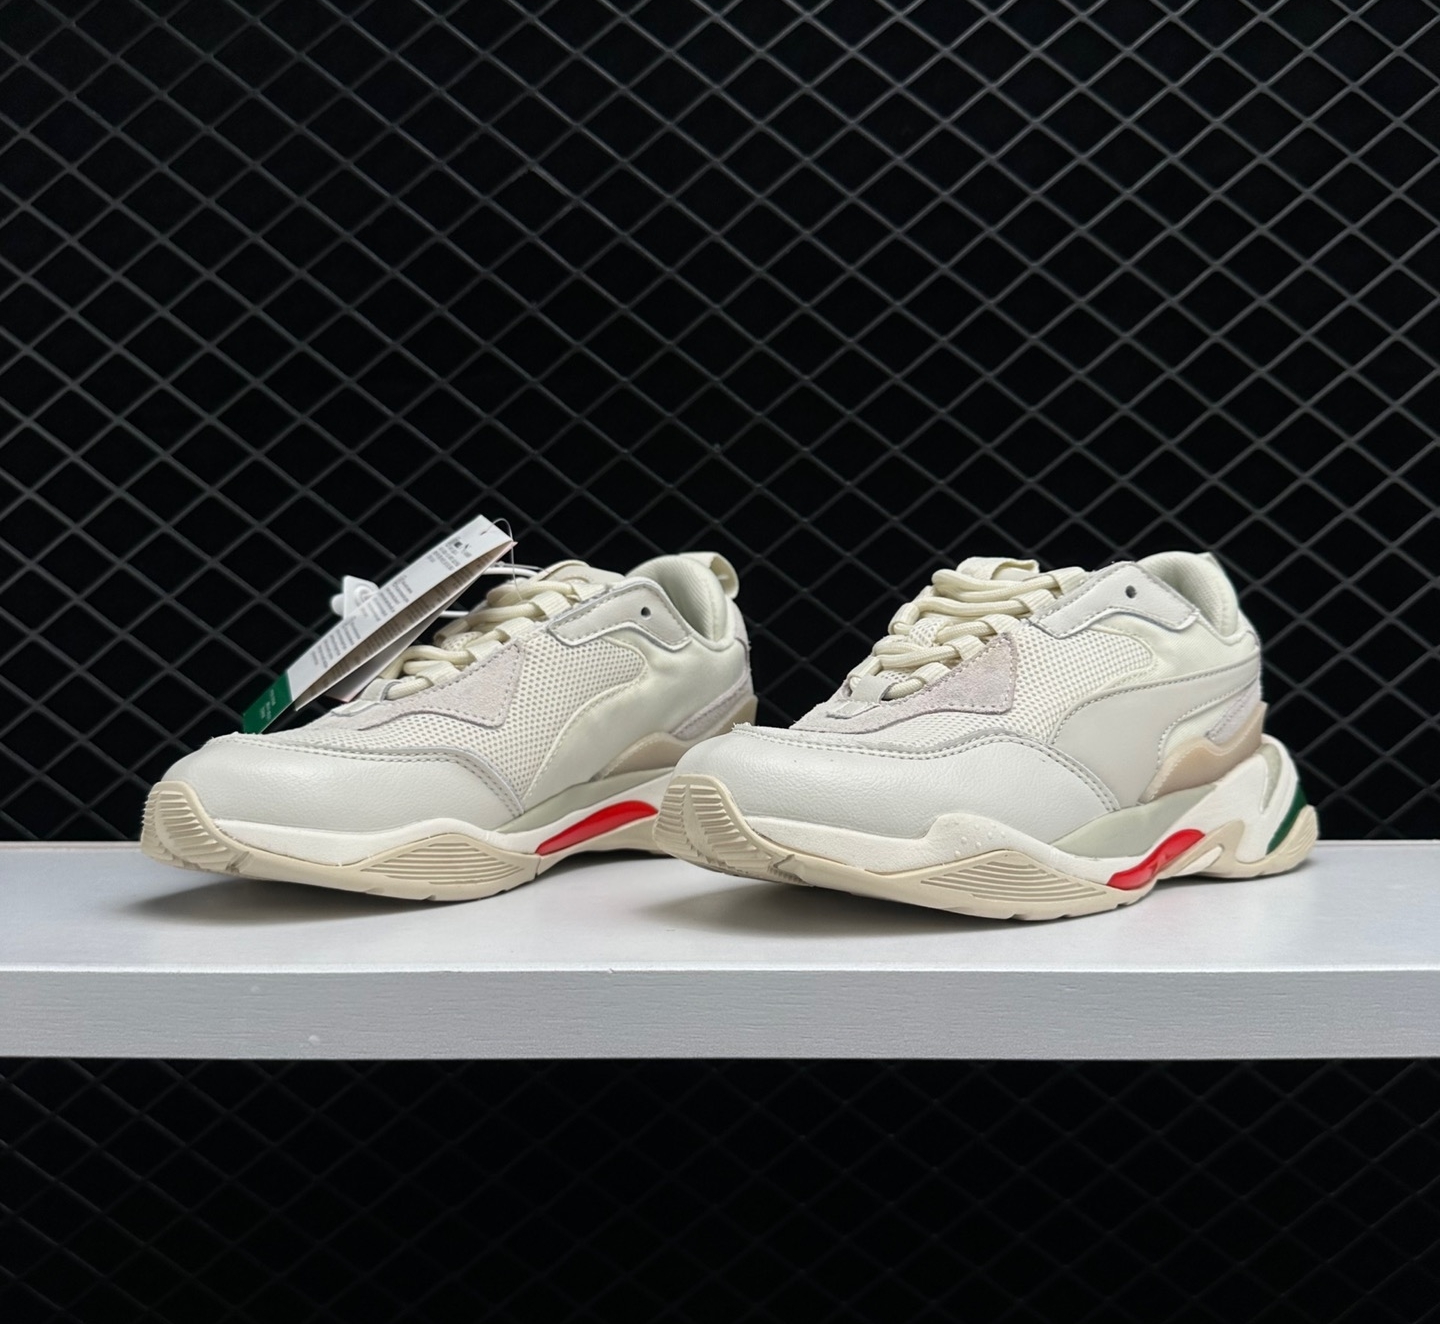 Puma Thunder Spectra Italian Flag | Limited Edition Sneakers